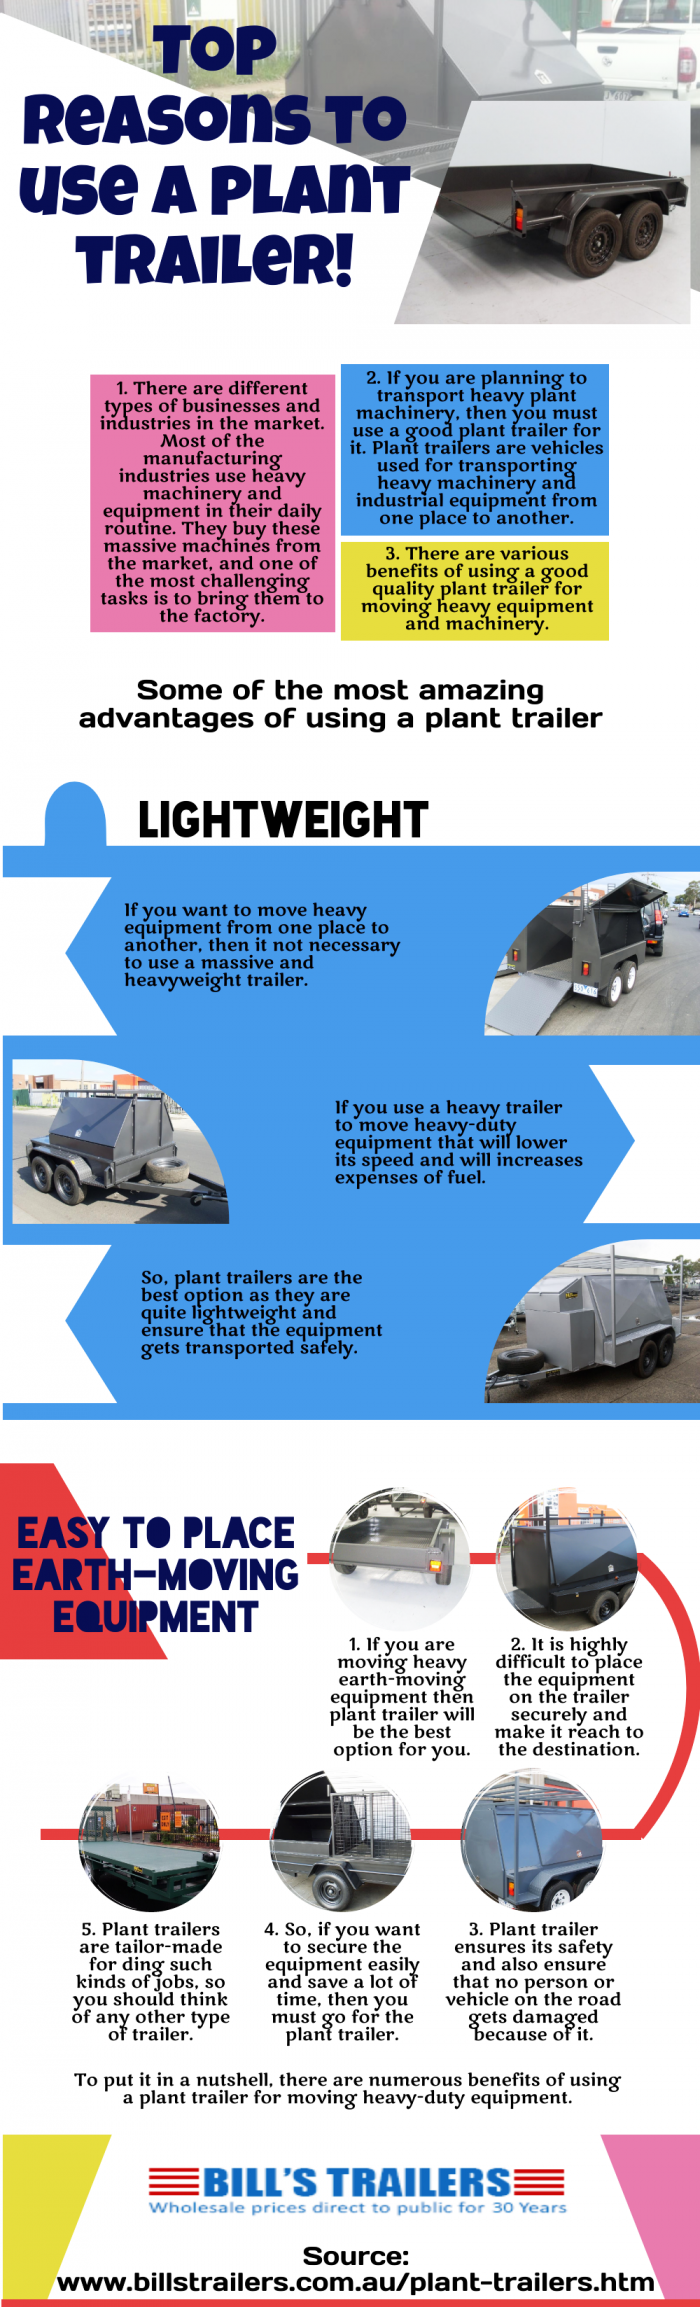 Top factors to consider while choosing a trailer